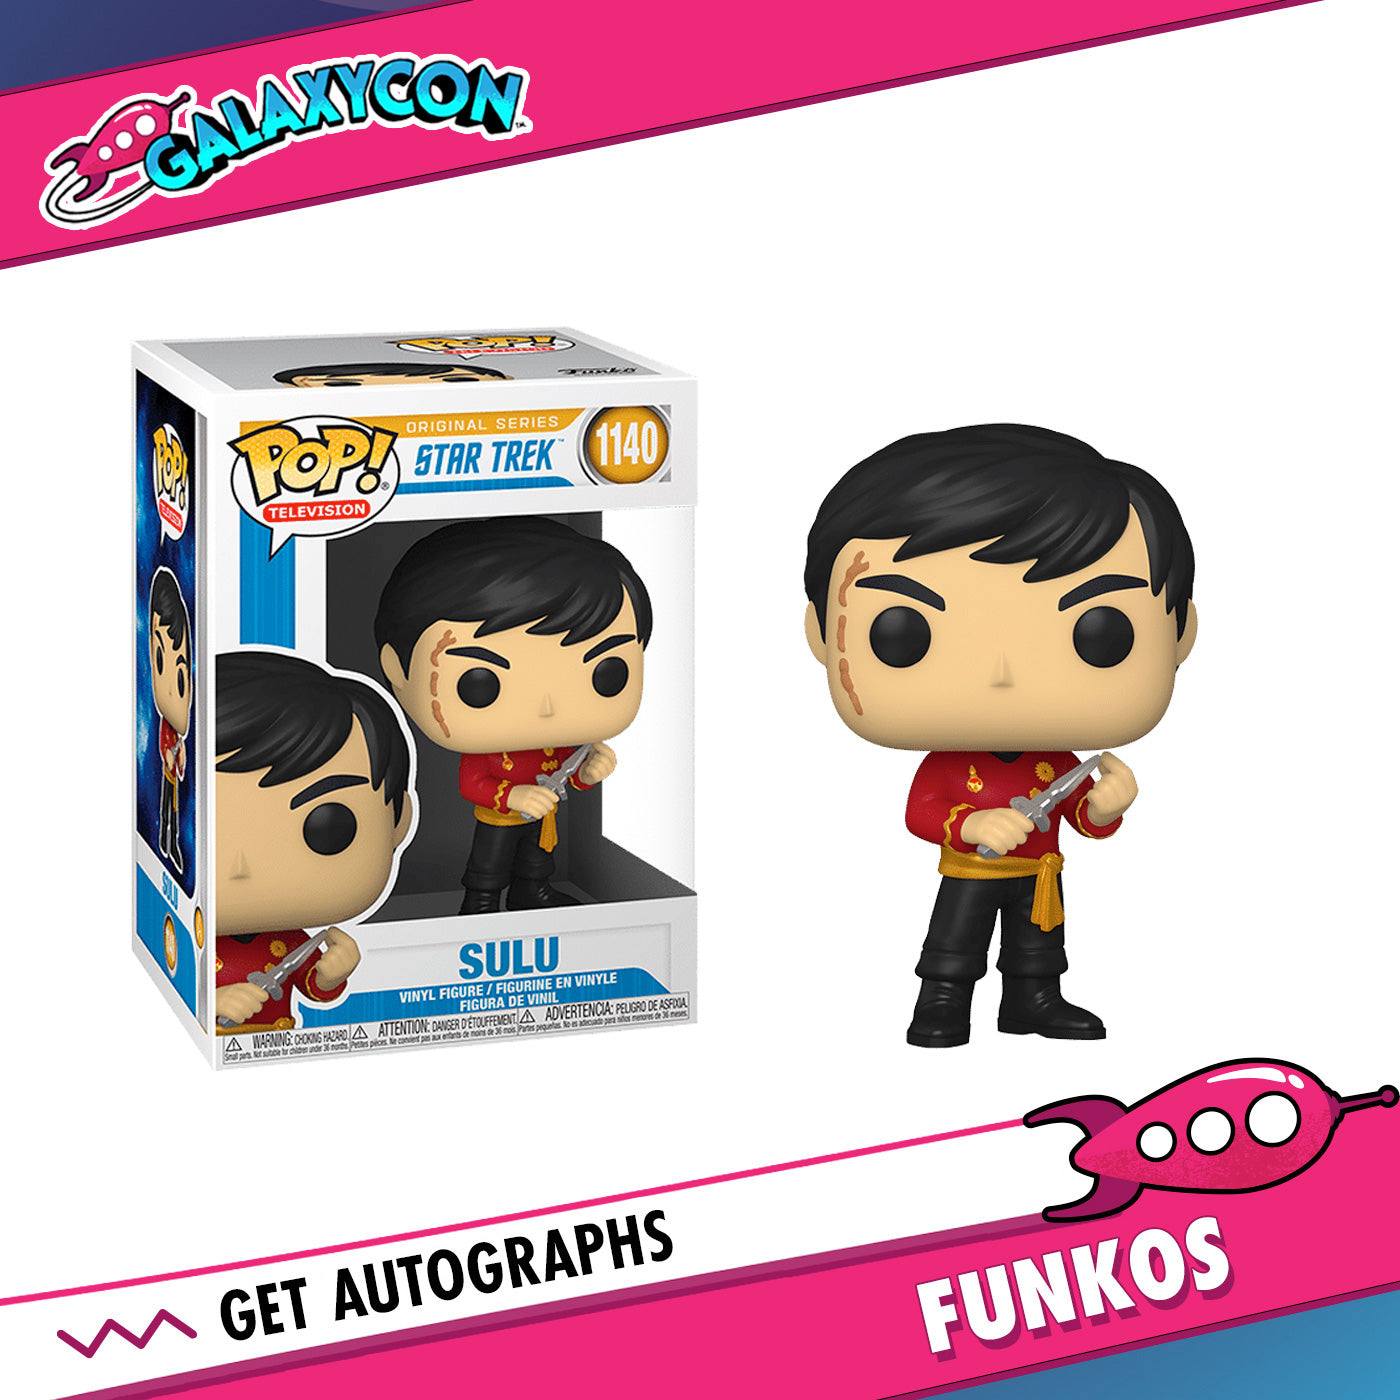 George Takei: Autograph Signing on a Funko Pop, February 25th